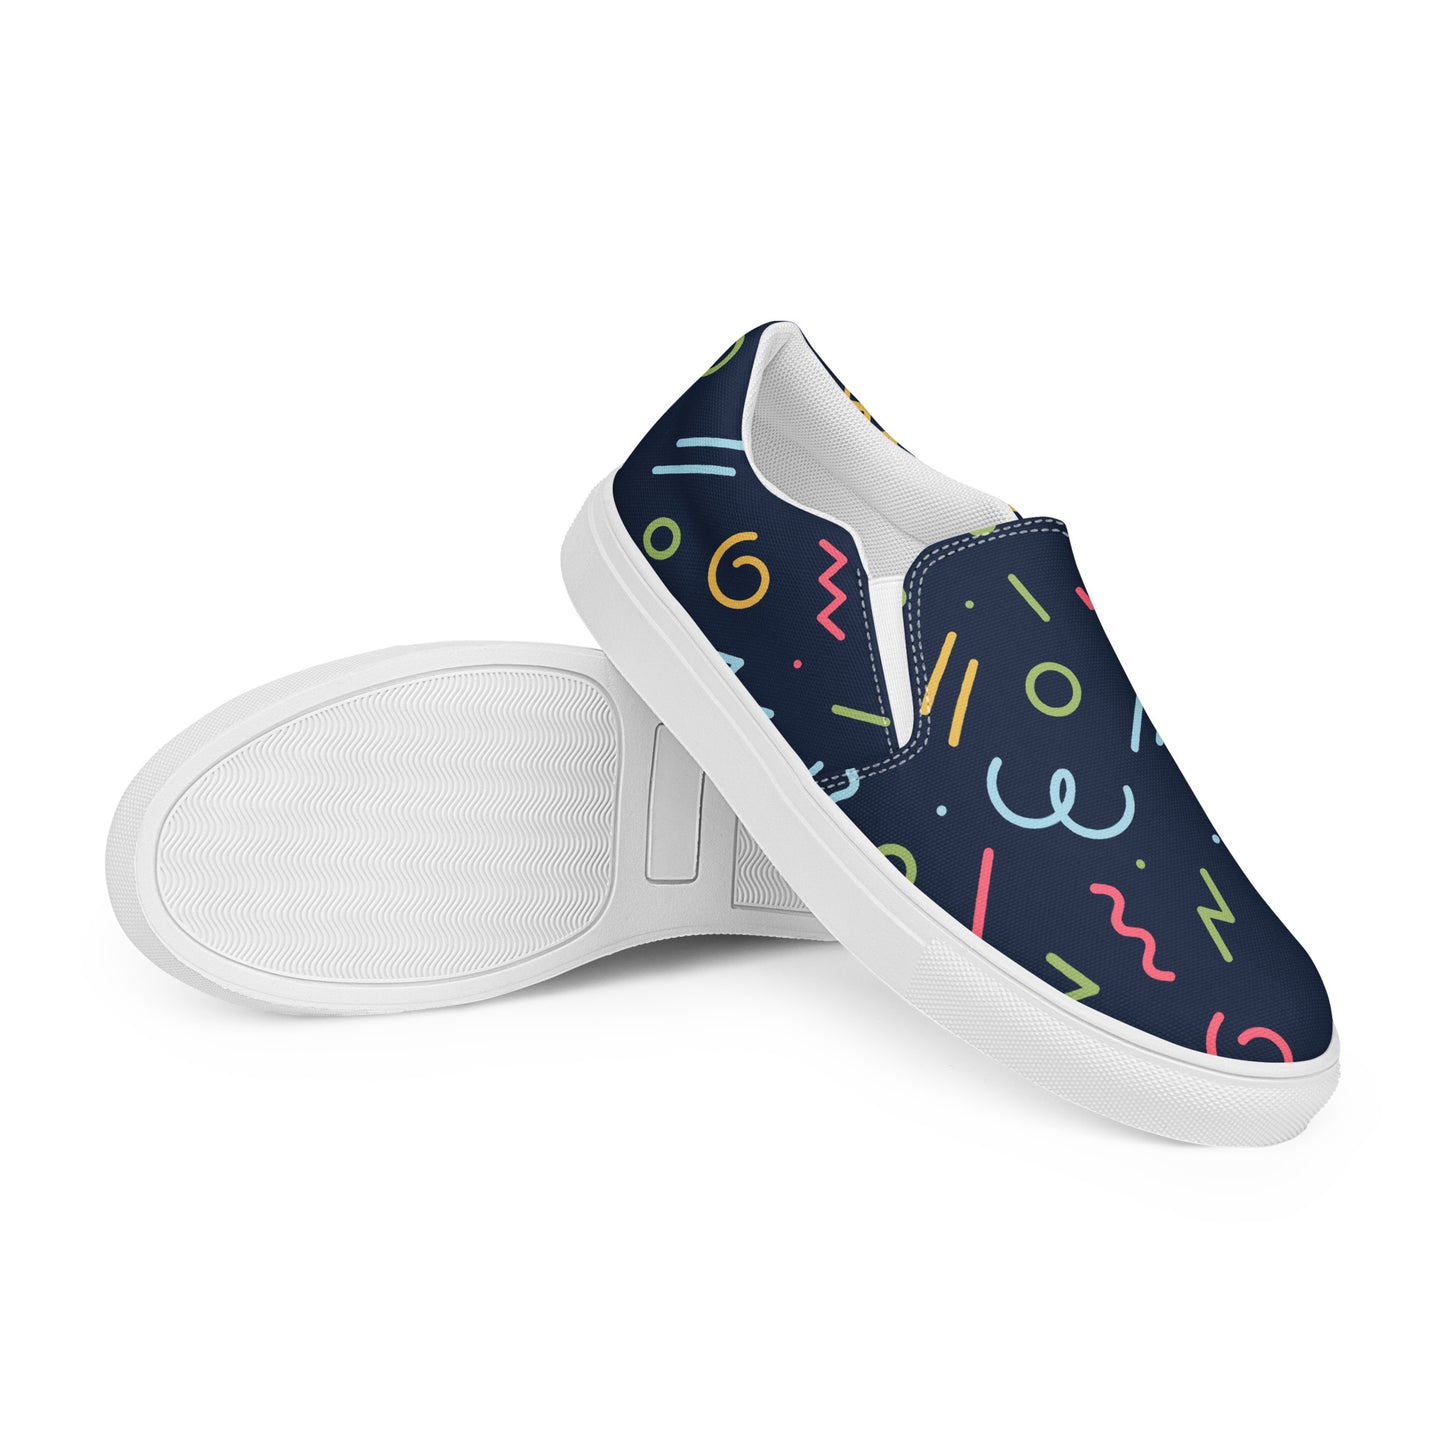 Squiggles - Men’s slip-on canvas shoes Mens Slip On Shoes